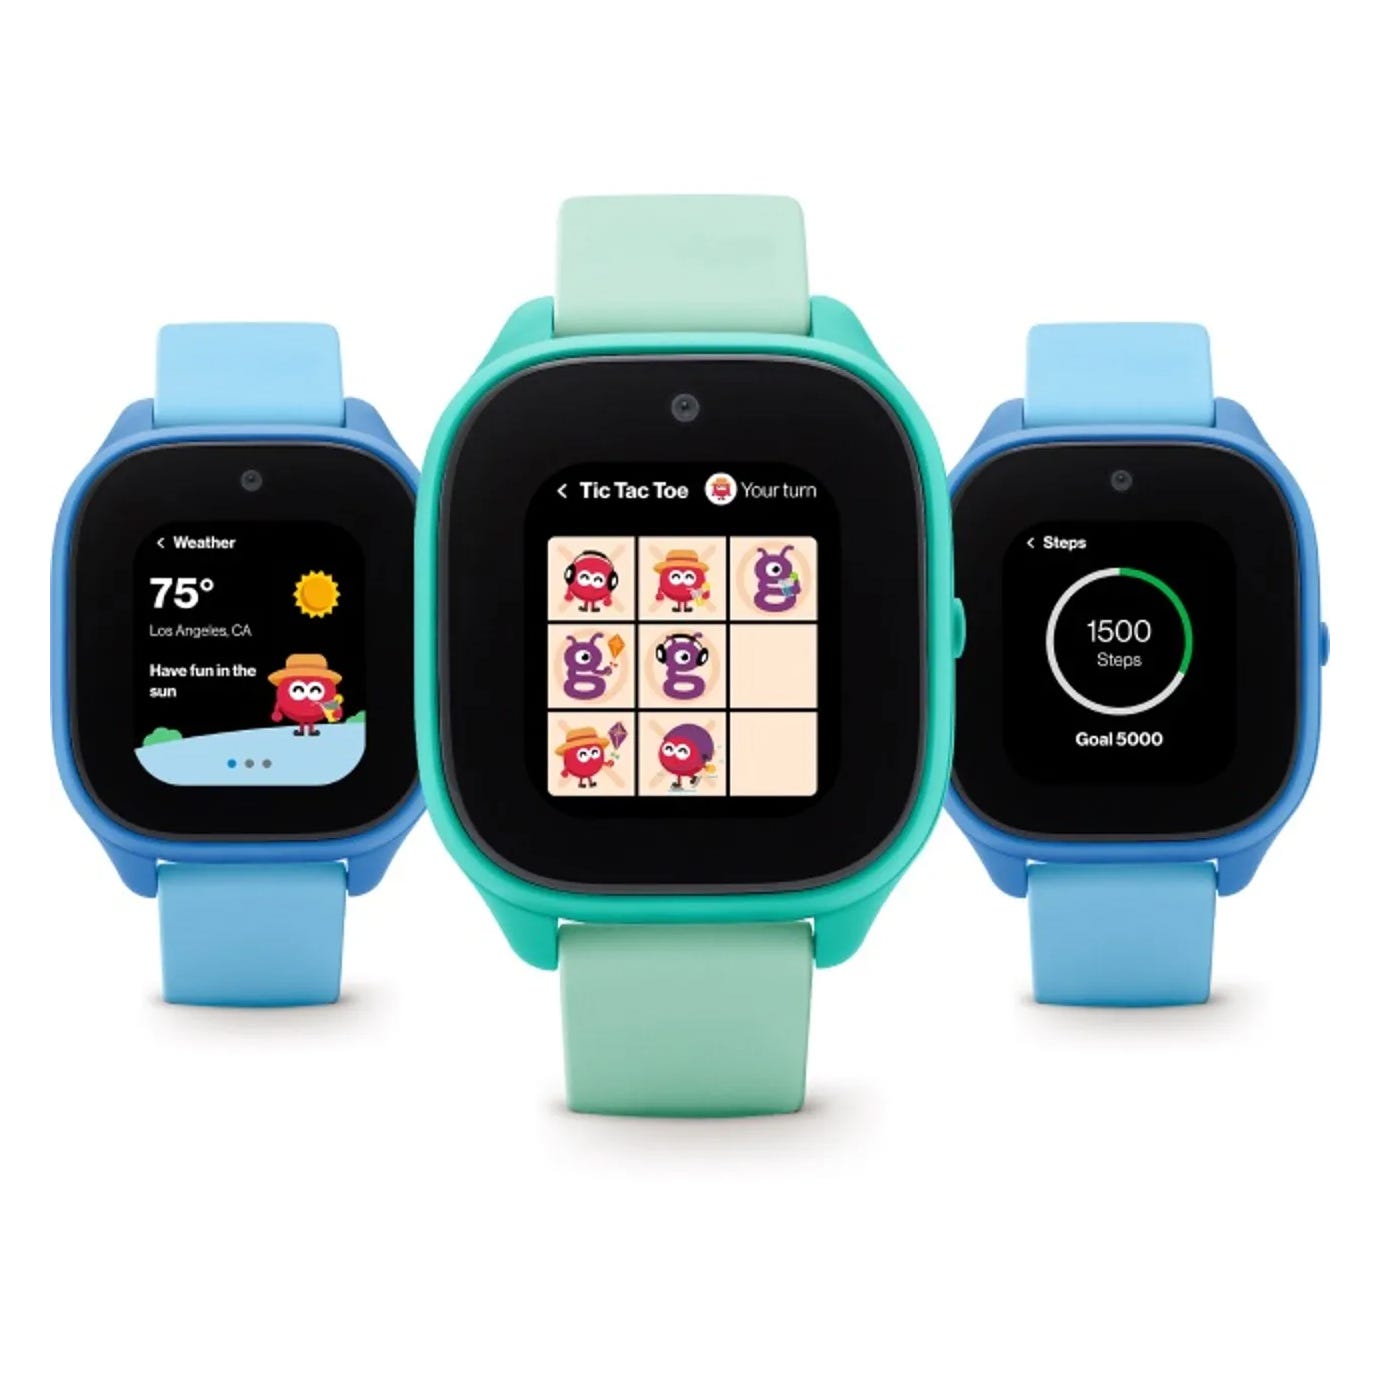 Three smartwatches with different display screens showing weather, a game of tic-tac-toe, and step count.